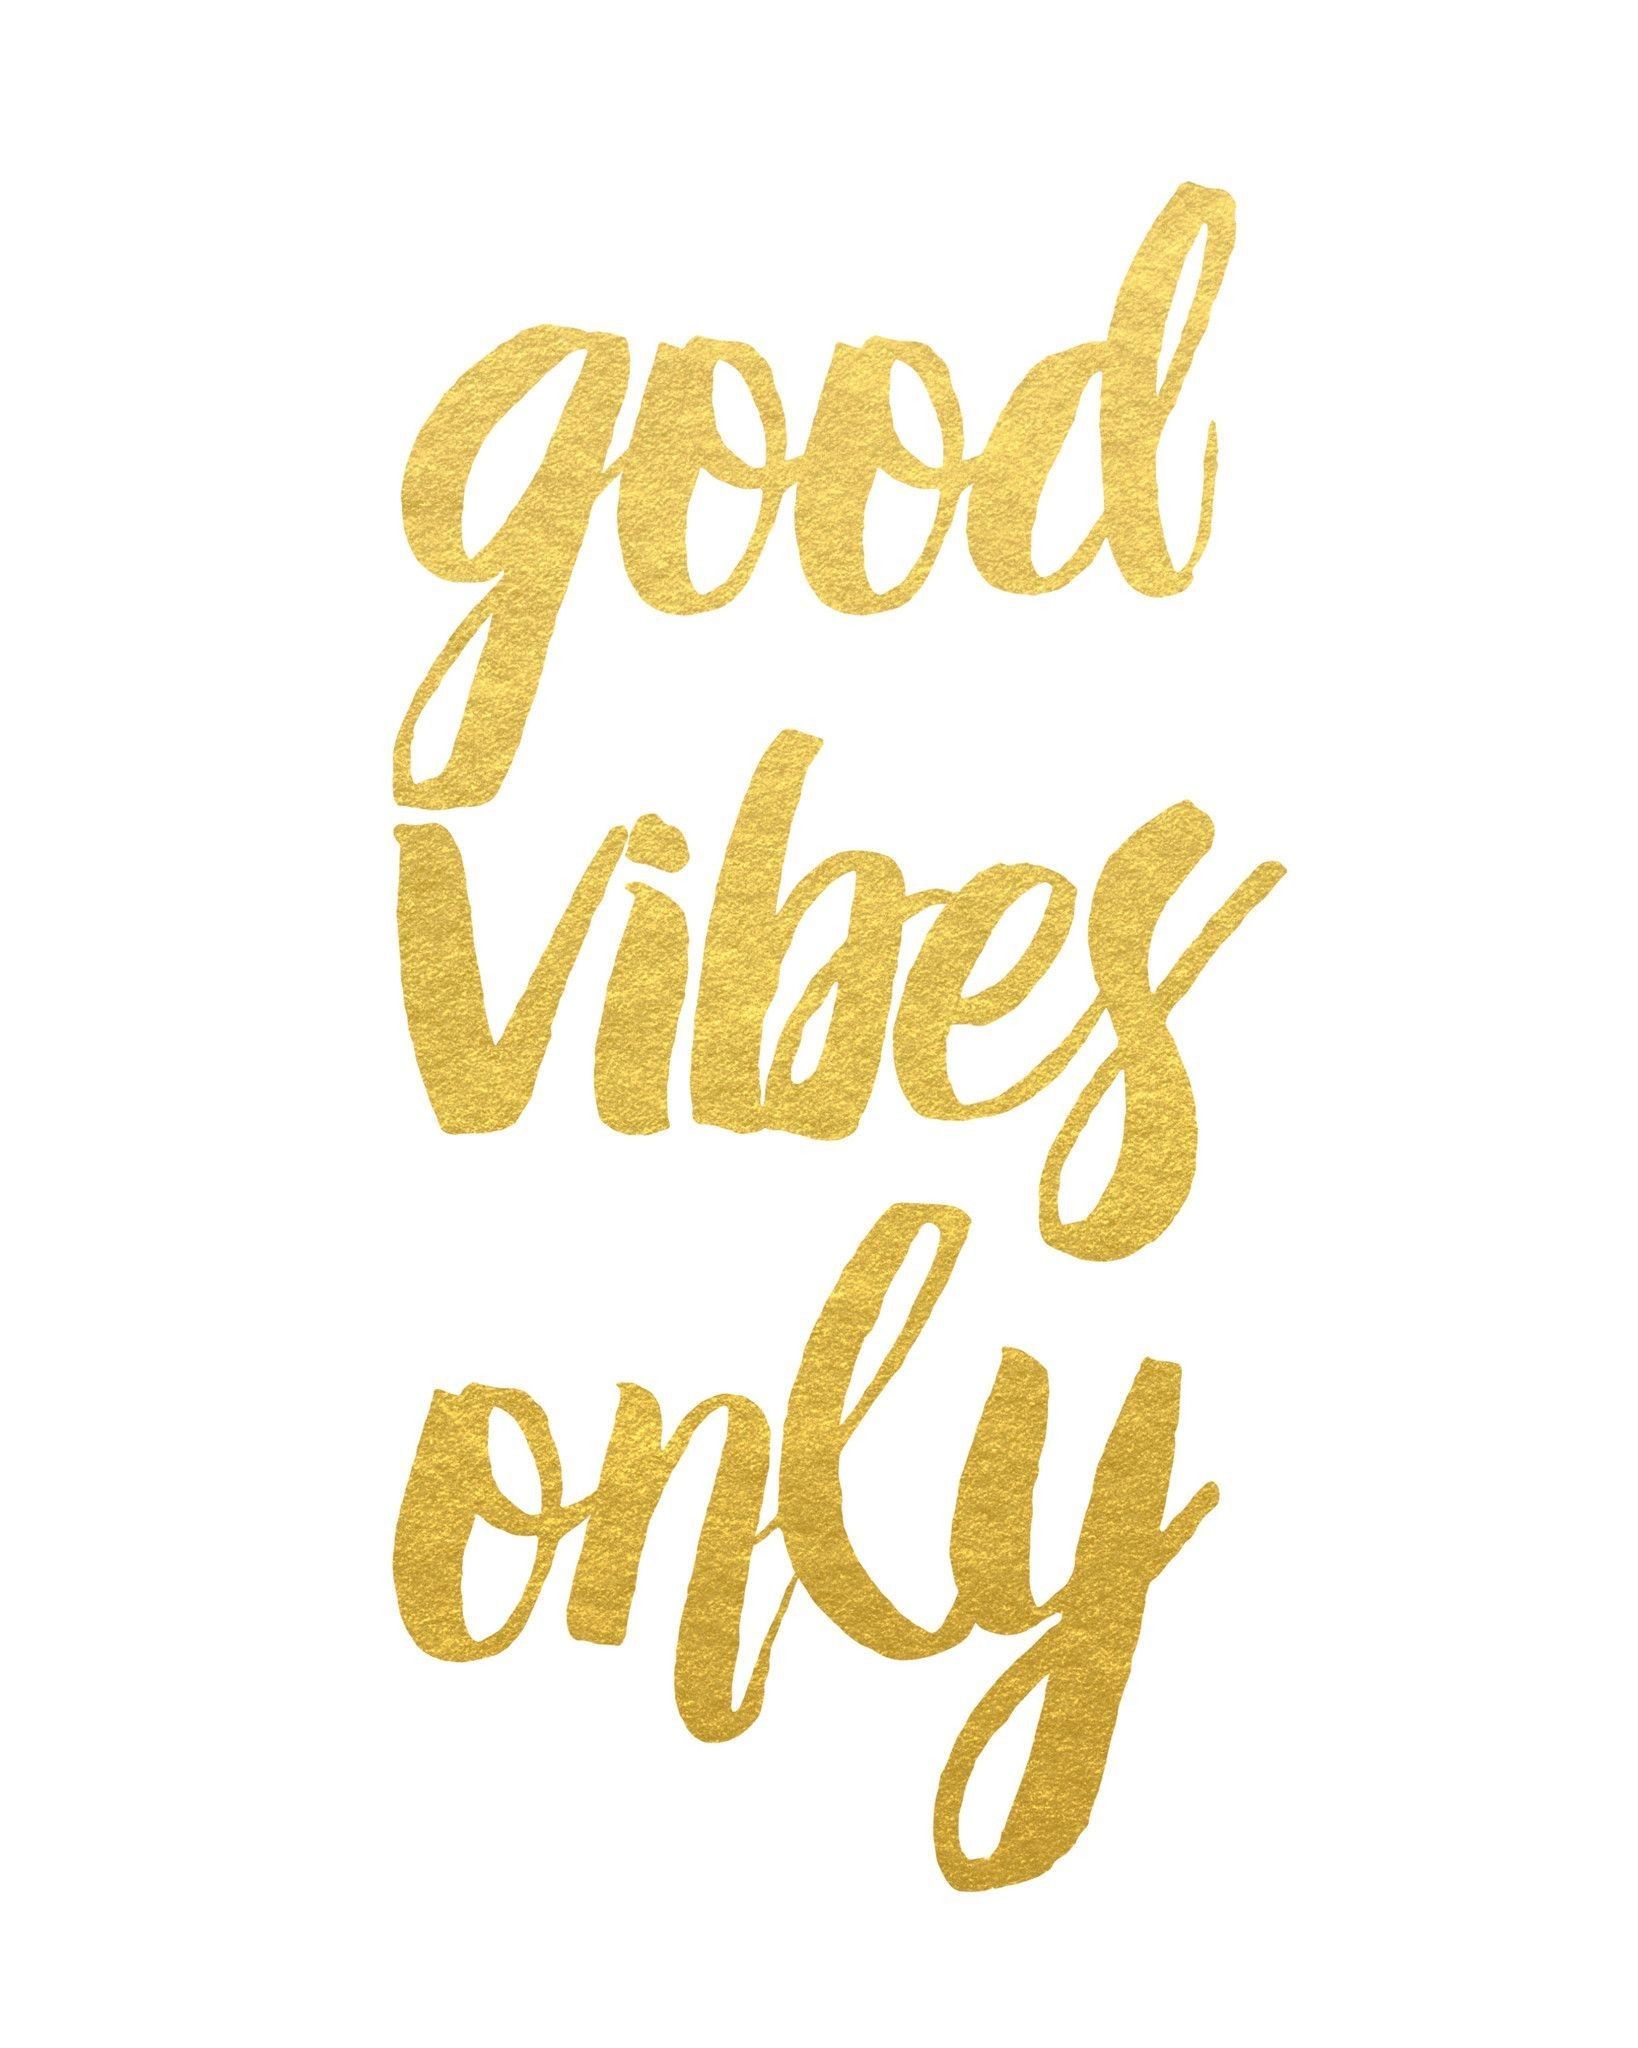 Good Vibes Background Images HD Pictures and Wallpaper For Free Download   Pngtree